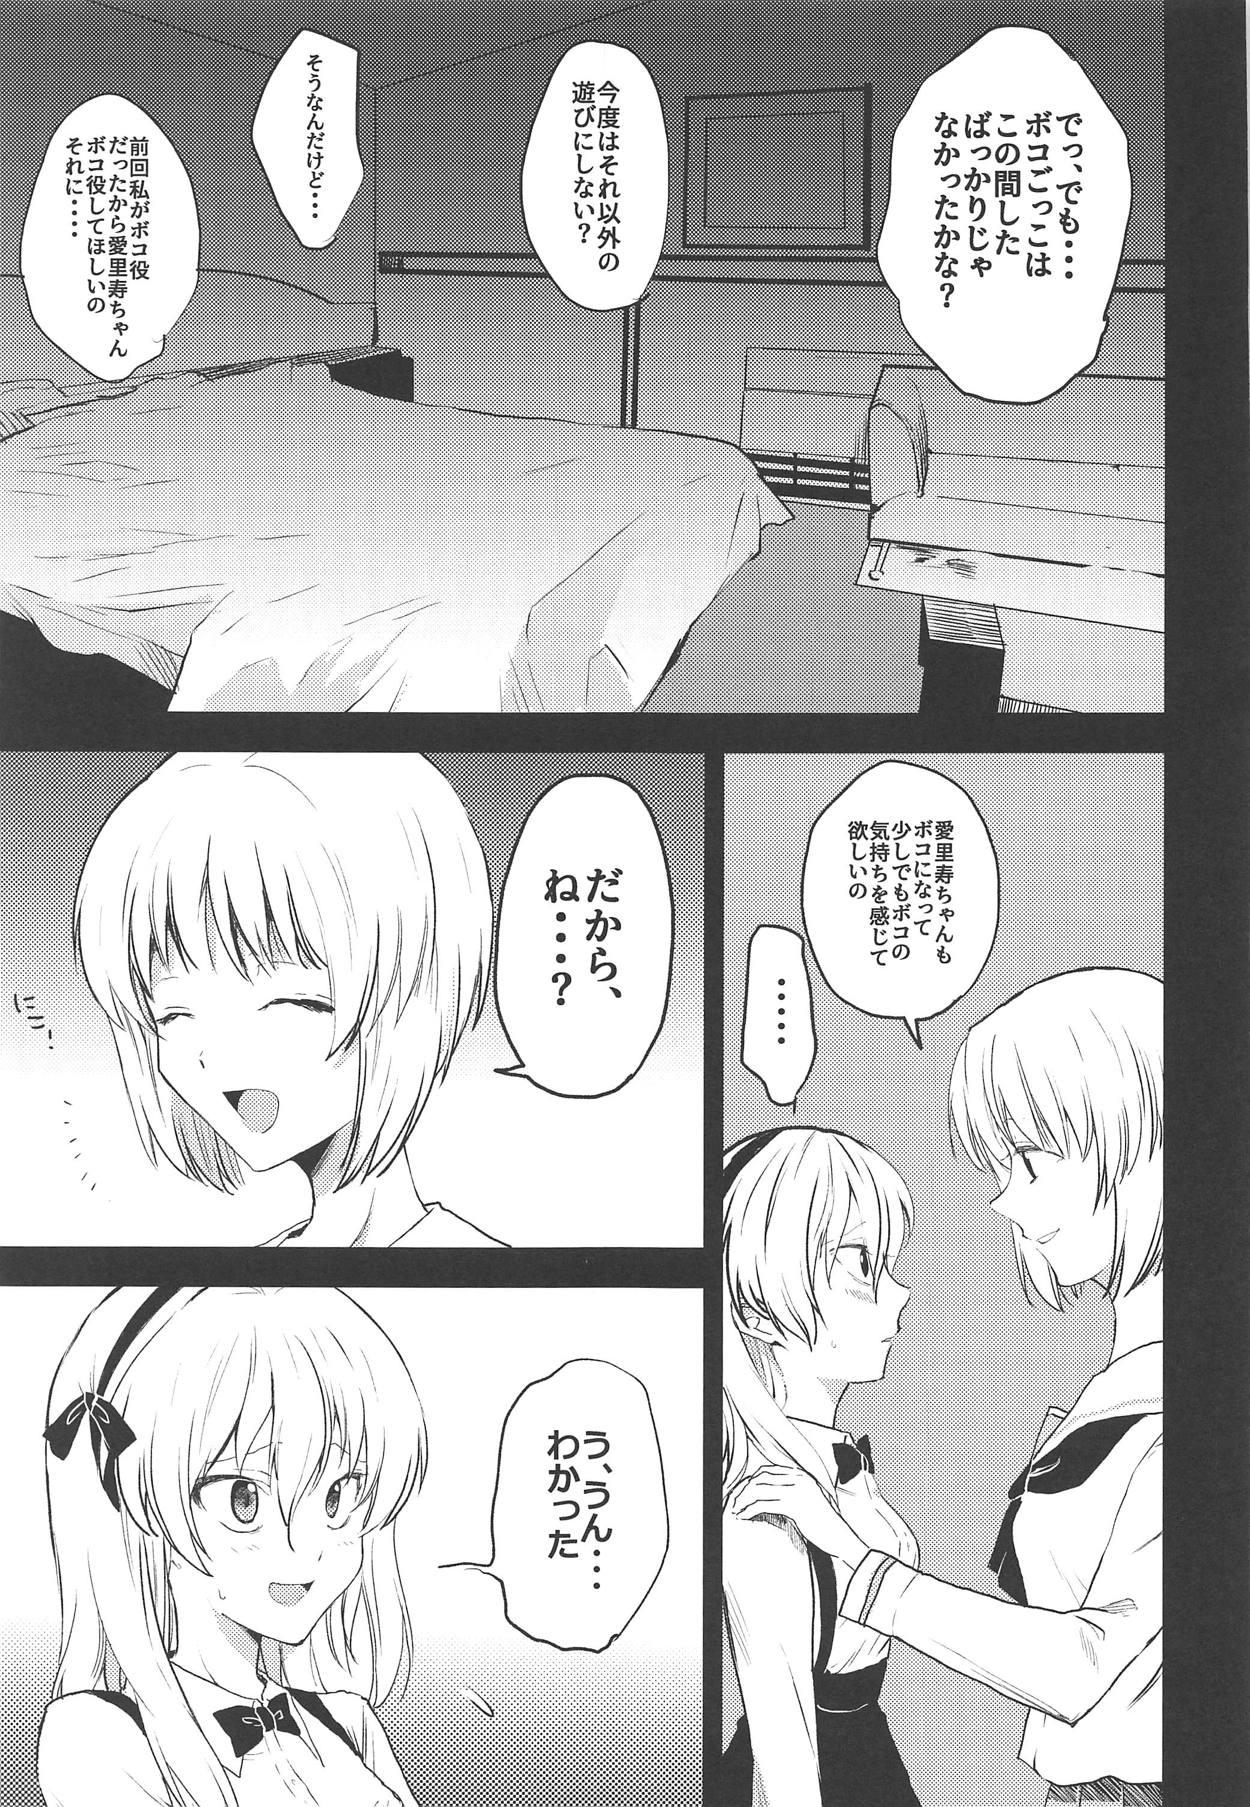 Fingers Miho-san no Boko - Girls und panzer Fuck For Money - Page 4